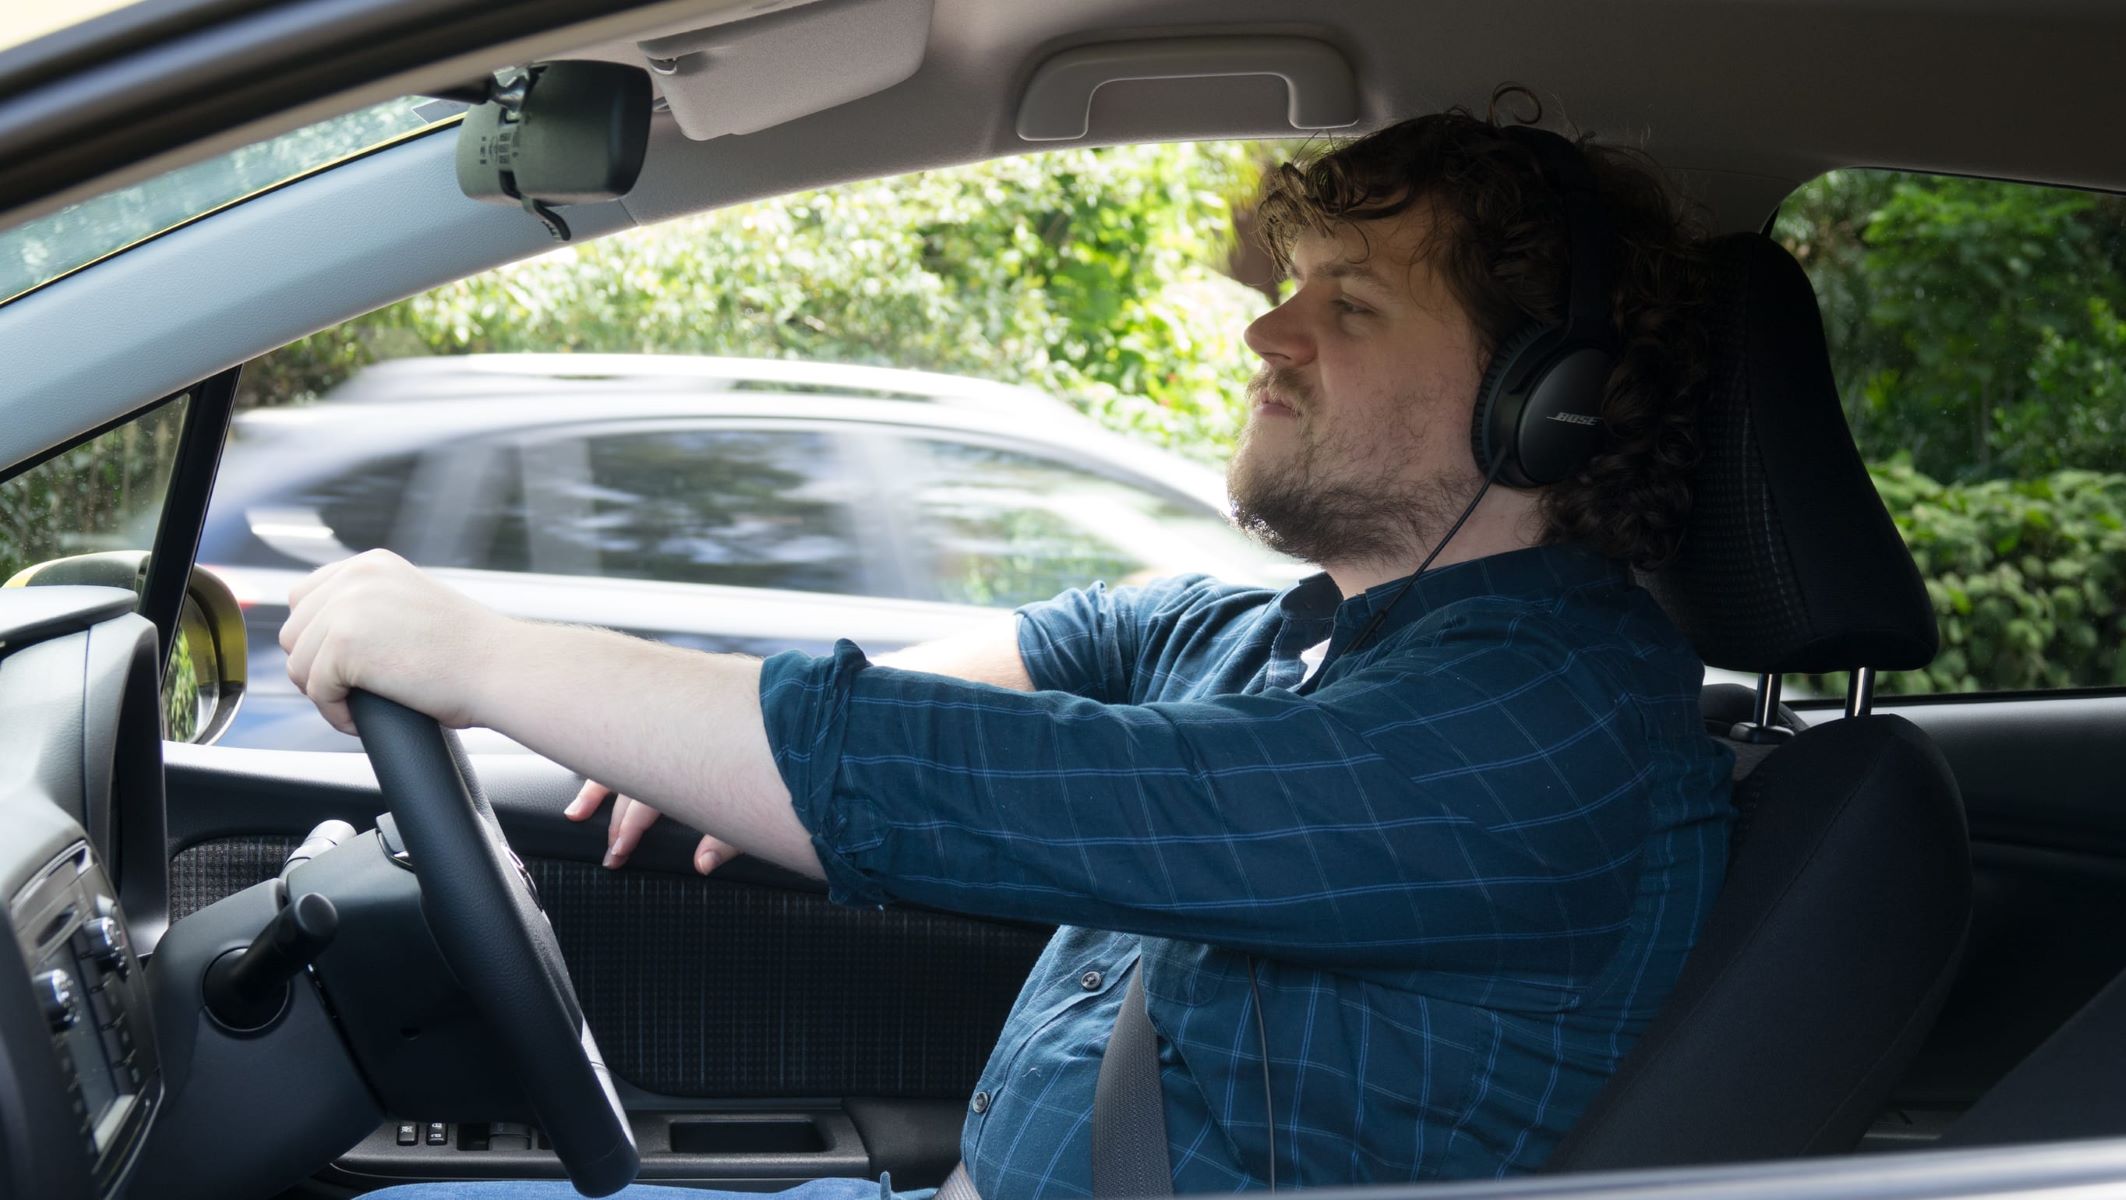 legal-driving-and-headsets-understanding-the-rules